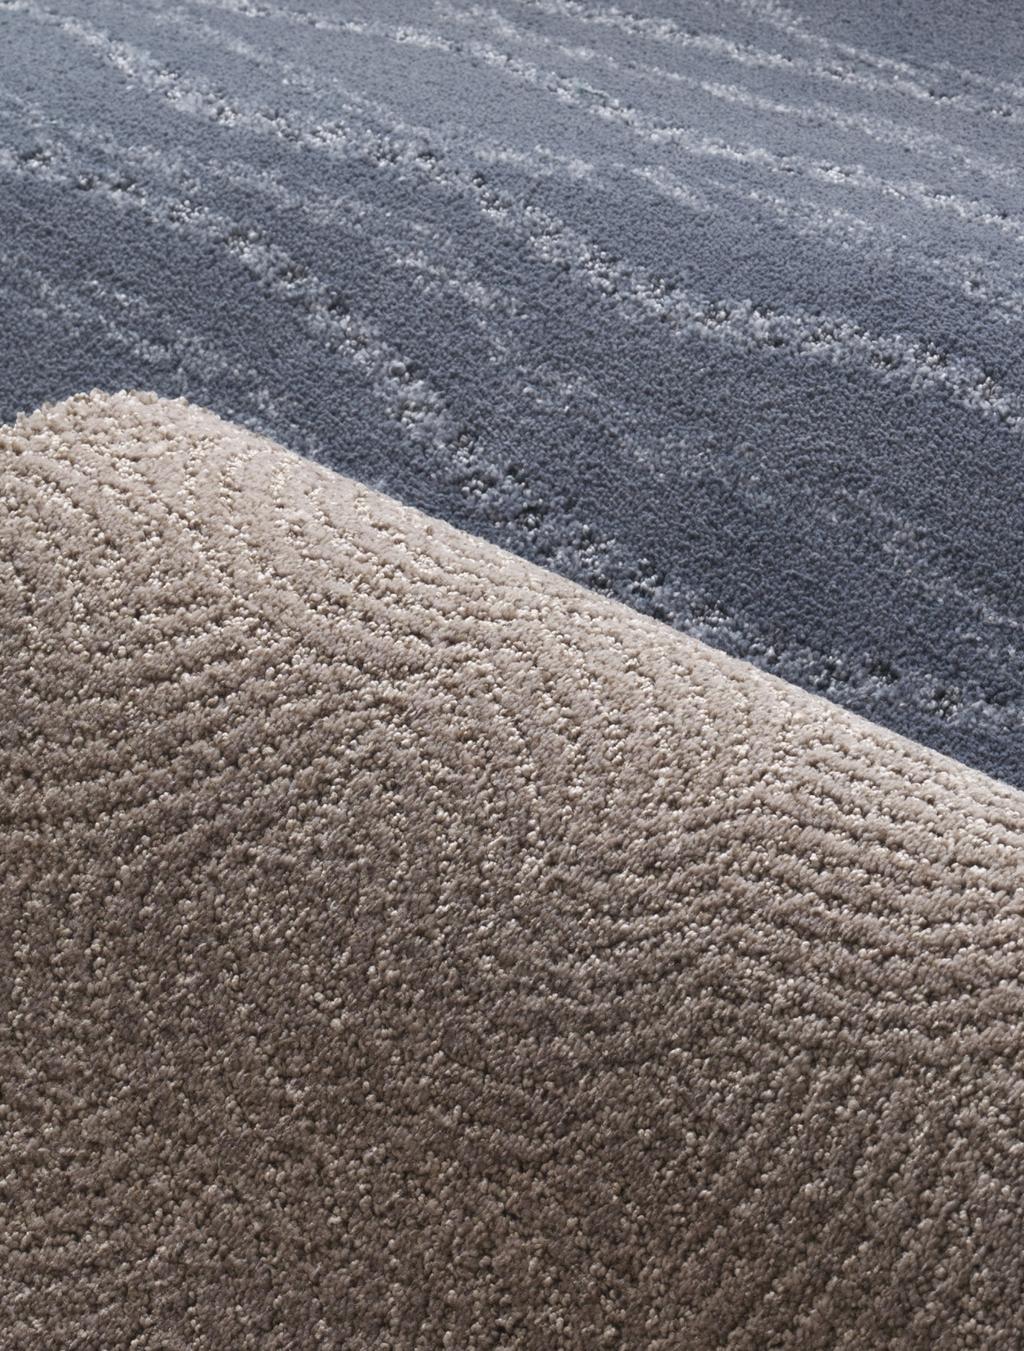 The best carpet ever invented...again. When SmartStrand was unveiled in 2005, it was quickly embraced by consumers looking for an innovative alternative to traditional carpets.